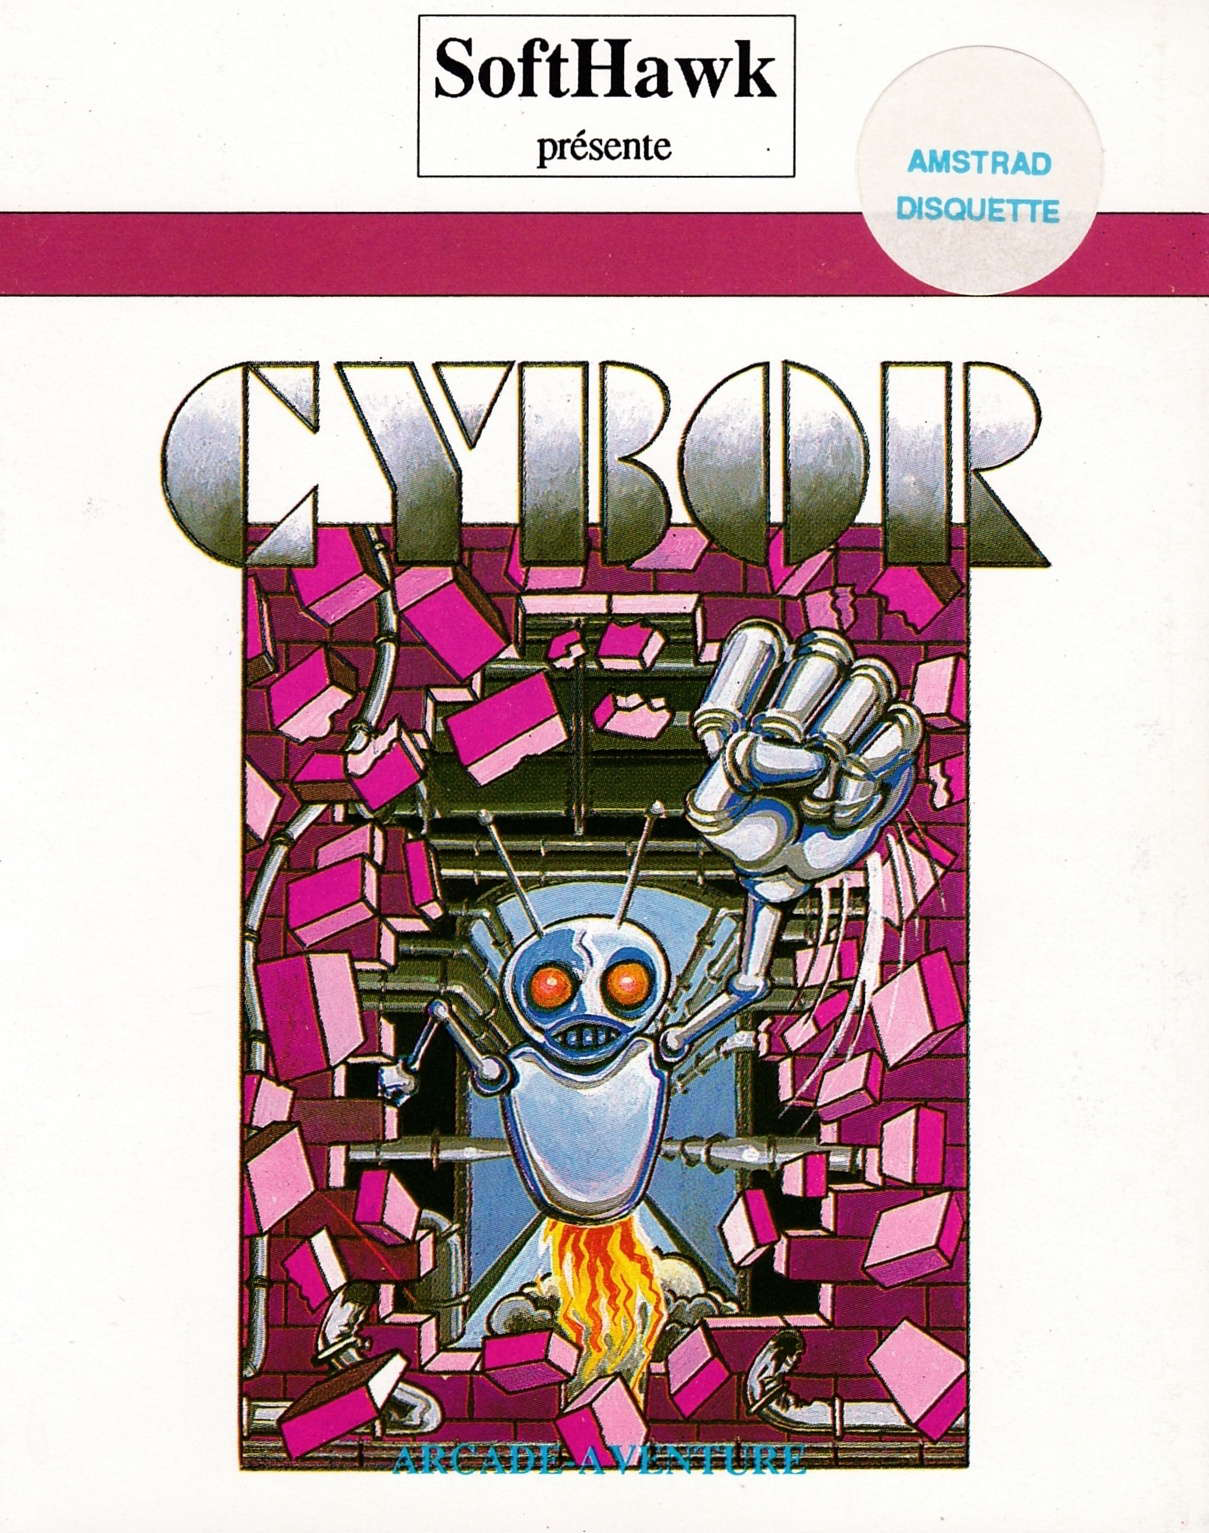 cover of the Amstrad CPC game Cybor  by GameBase CPC